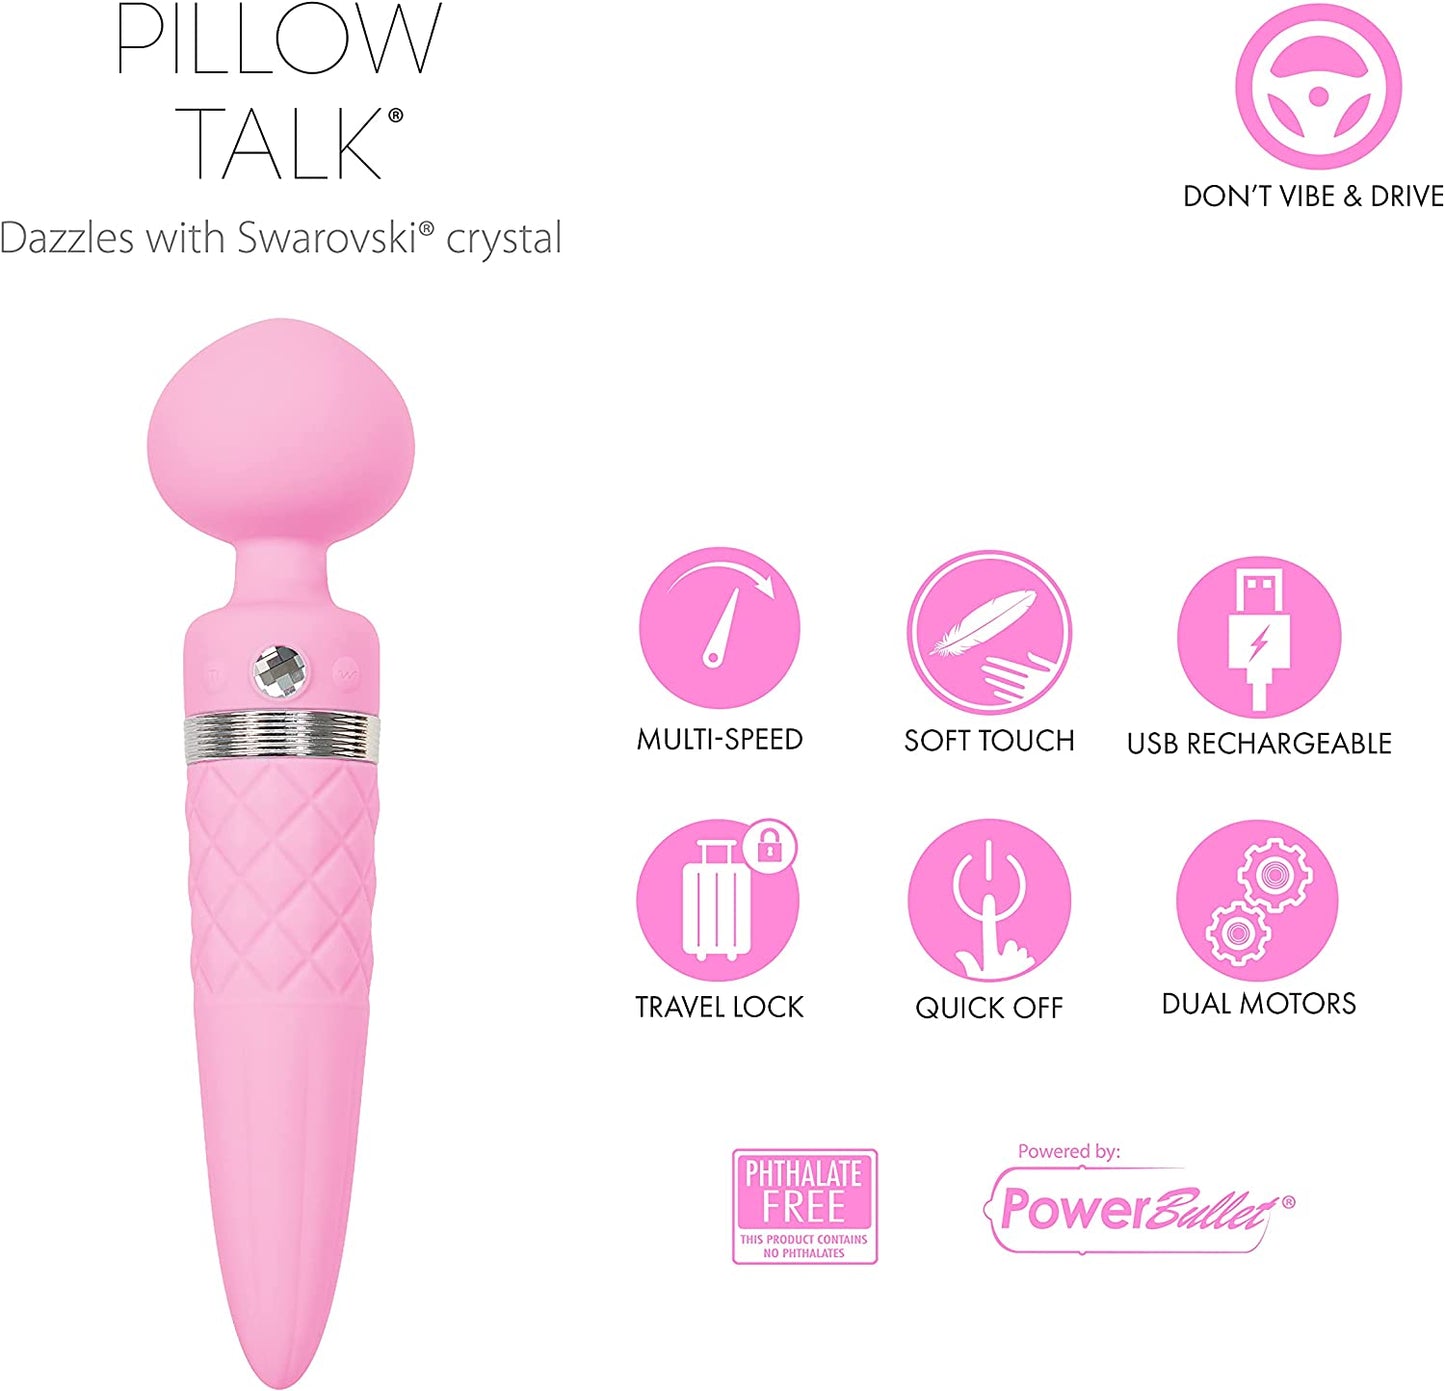 SHOP Pillow Talk Sultry Dual Ended Warming Heated Vibrator Massager | Pink $121.99AUD FREE SHIPPING Australia. Sultry by Pillow Talk has a smooth rounded head and provides powerful vibrations. It has a tapered insertable handle that rotates 360 degrees for incredible G-spot stimulation. 